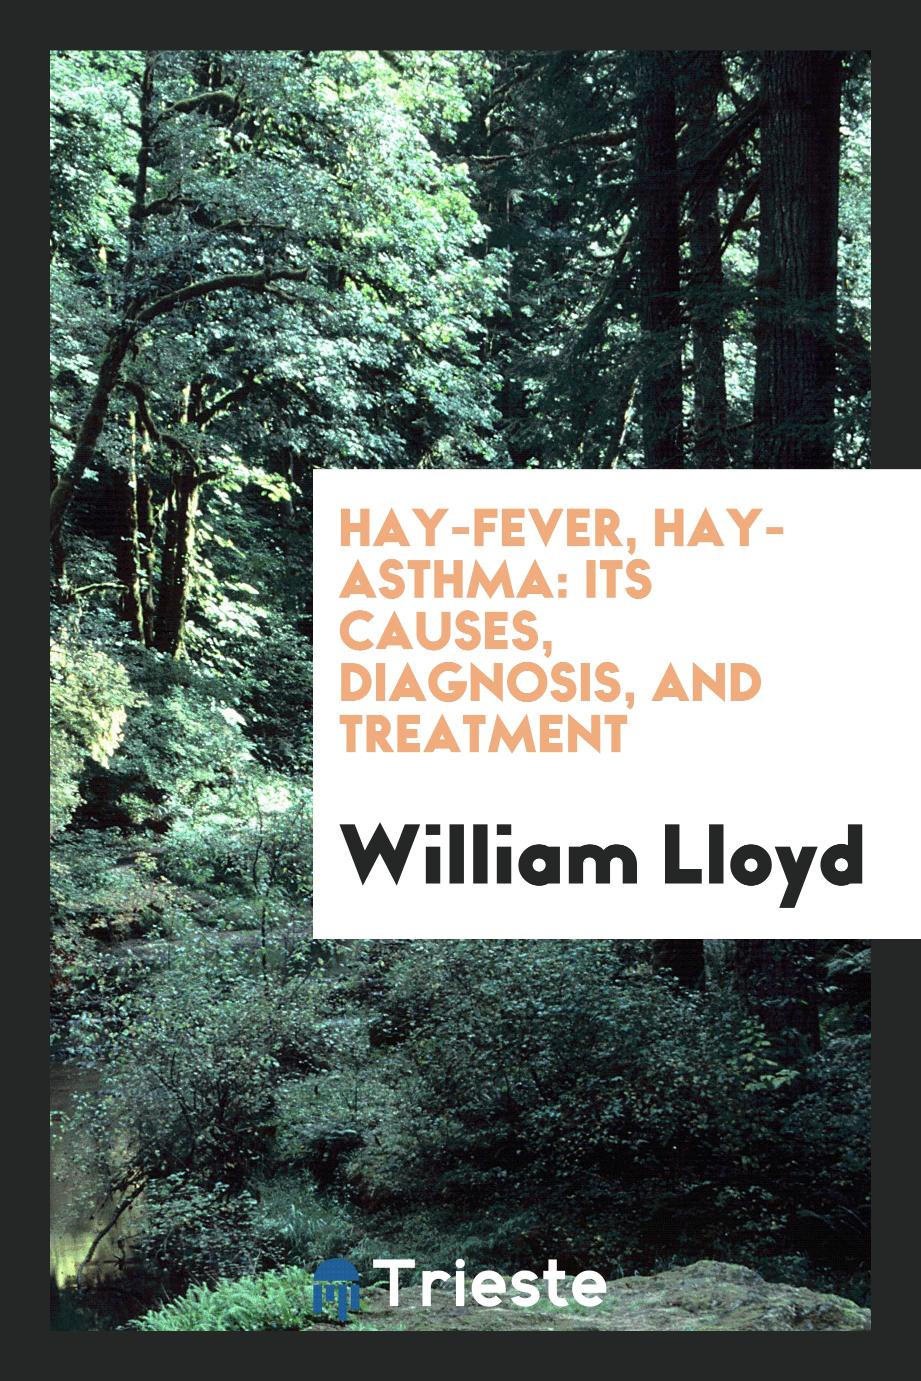 Hay-Fever, Hay-Asthma: Its Causes, Diagnosis, and Treatment